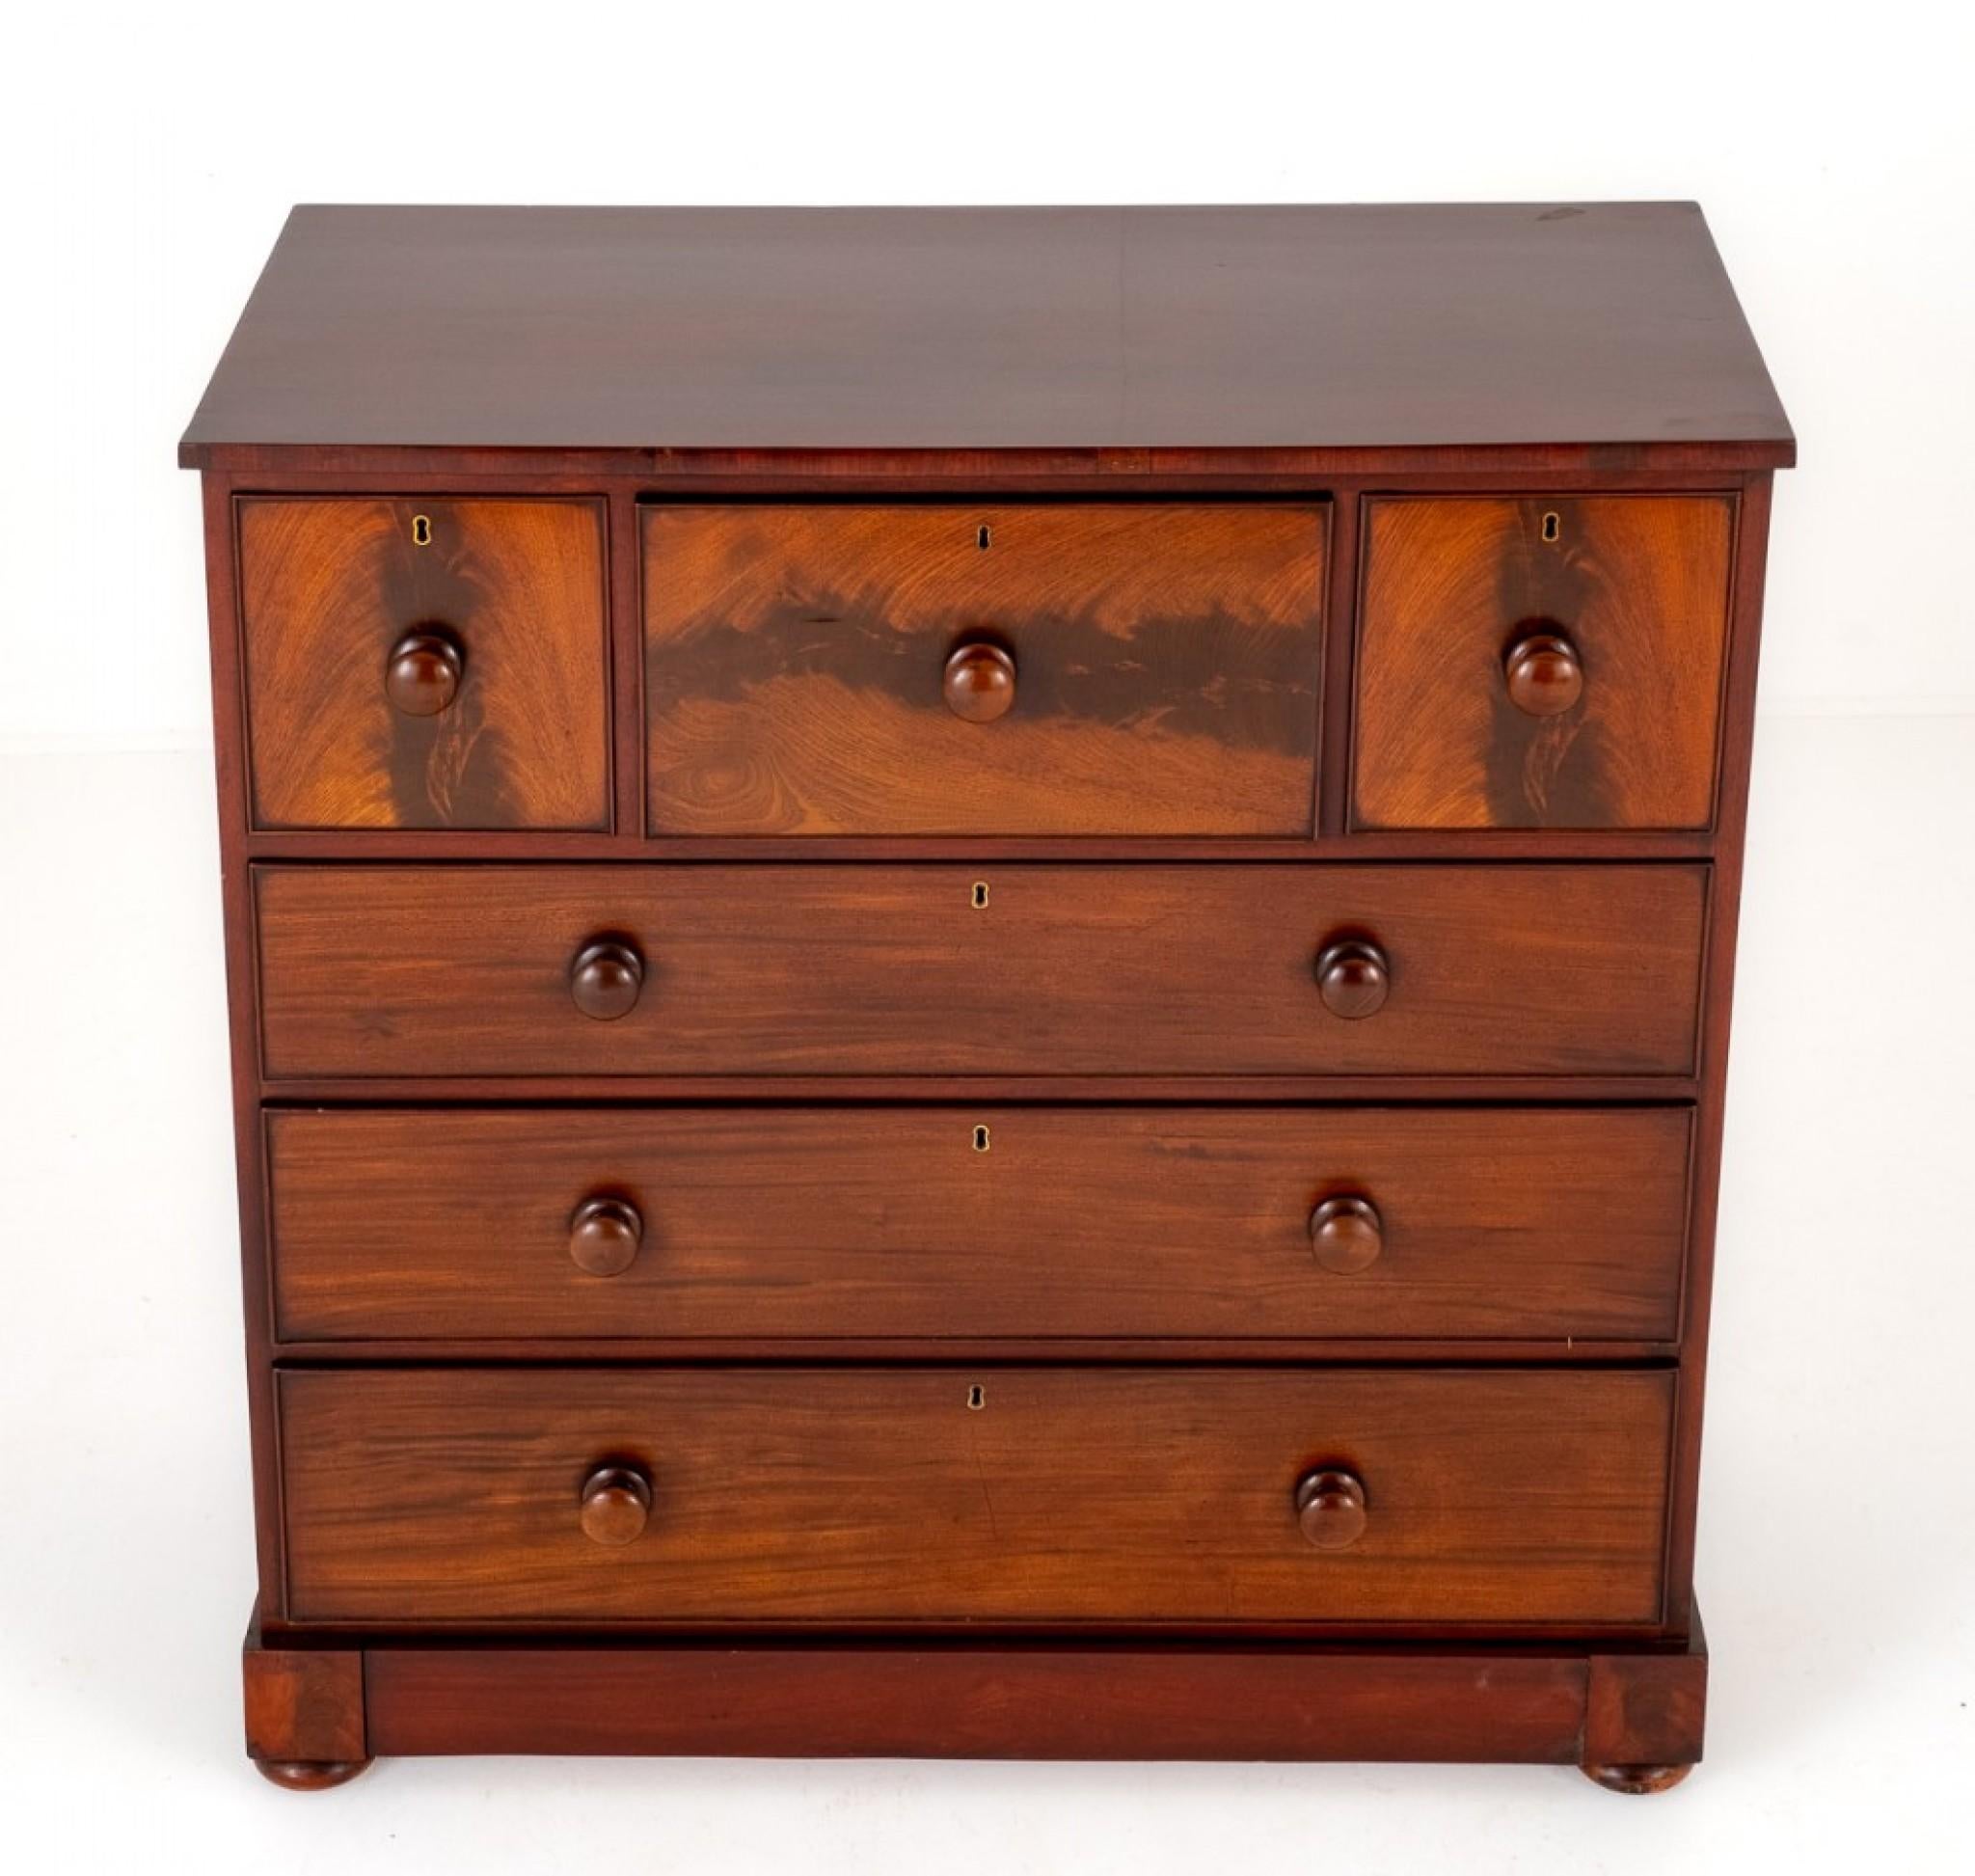 Victorian Mahogany Chest of Drawers.
This Chest of Drawers Features 6 Ash Lined Drawers with Turned Knobs.
The Top 3 Drawers Having Decorative Timbers.
Circa 1860
An Extra Feature of This Piece is a Secret Drawer Disguised as the Plinth